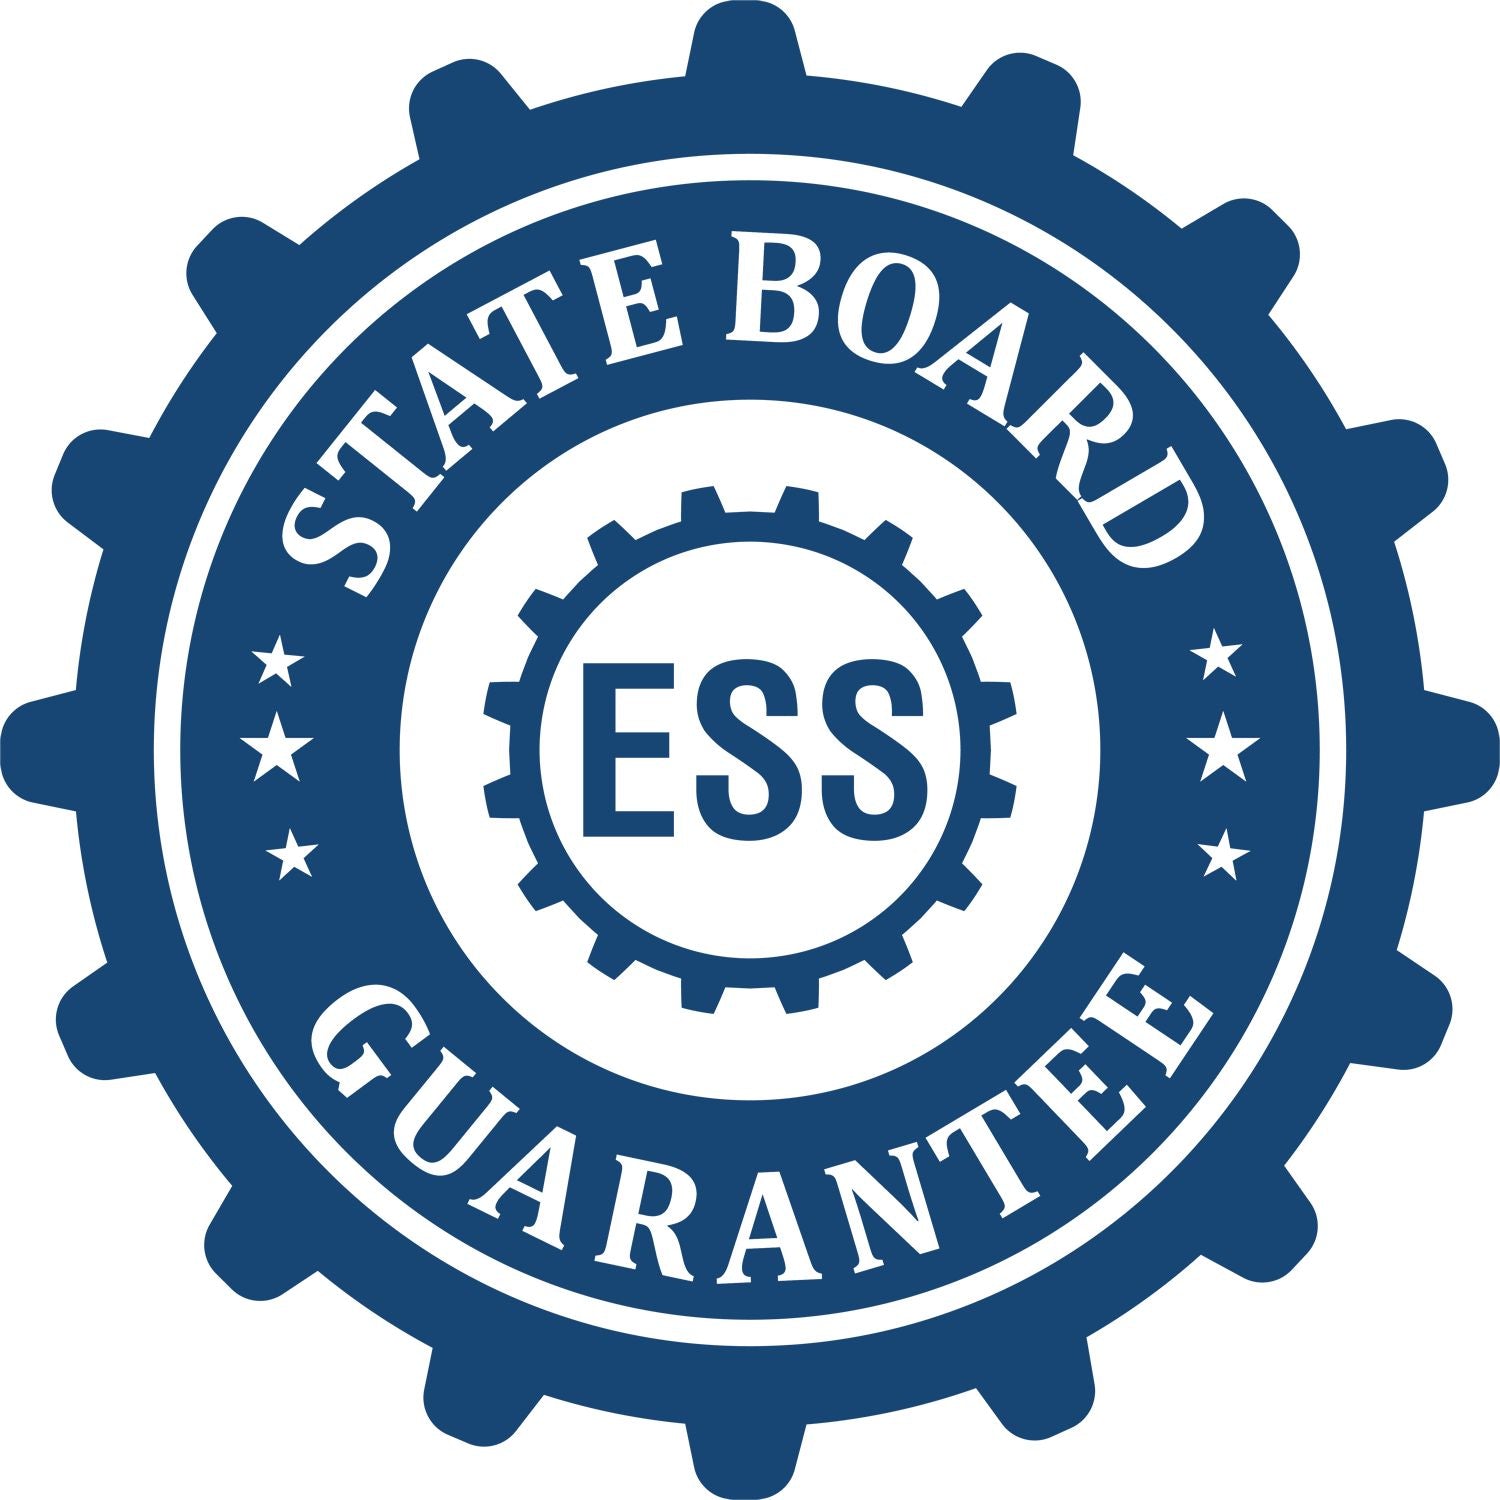 An emblem in a gear shape illustrating a state board guarantee for the Iowa Engineer Desk Seal product.